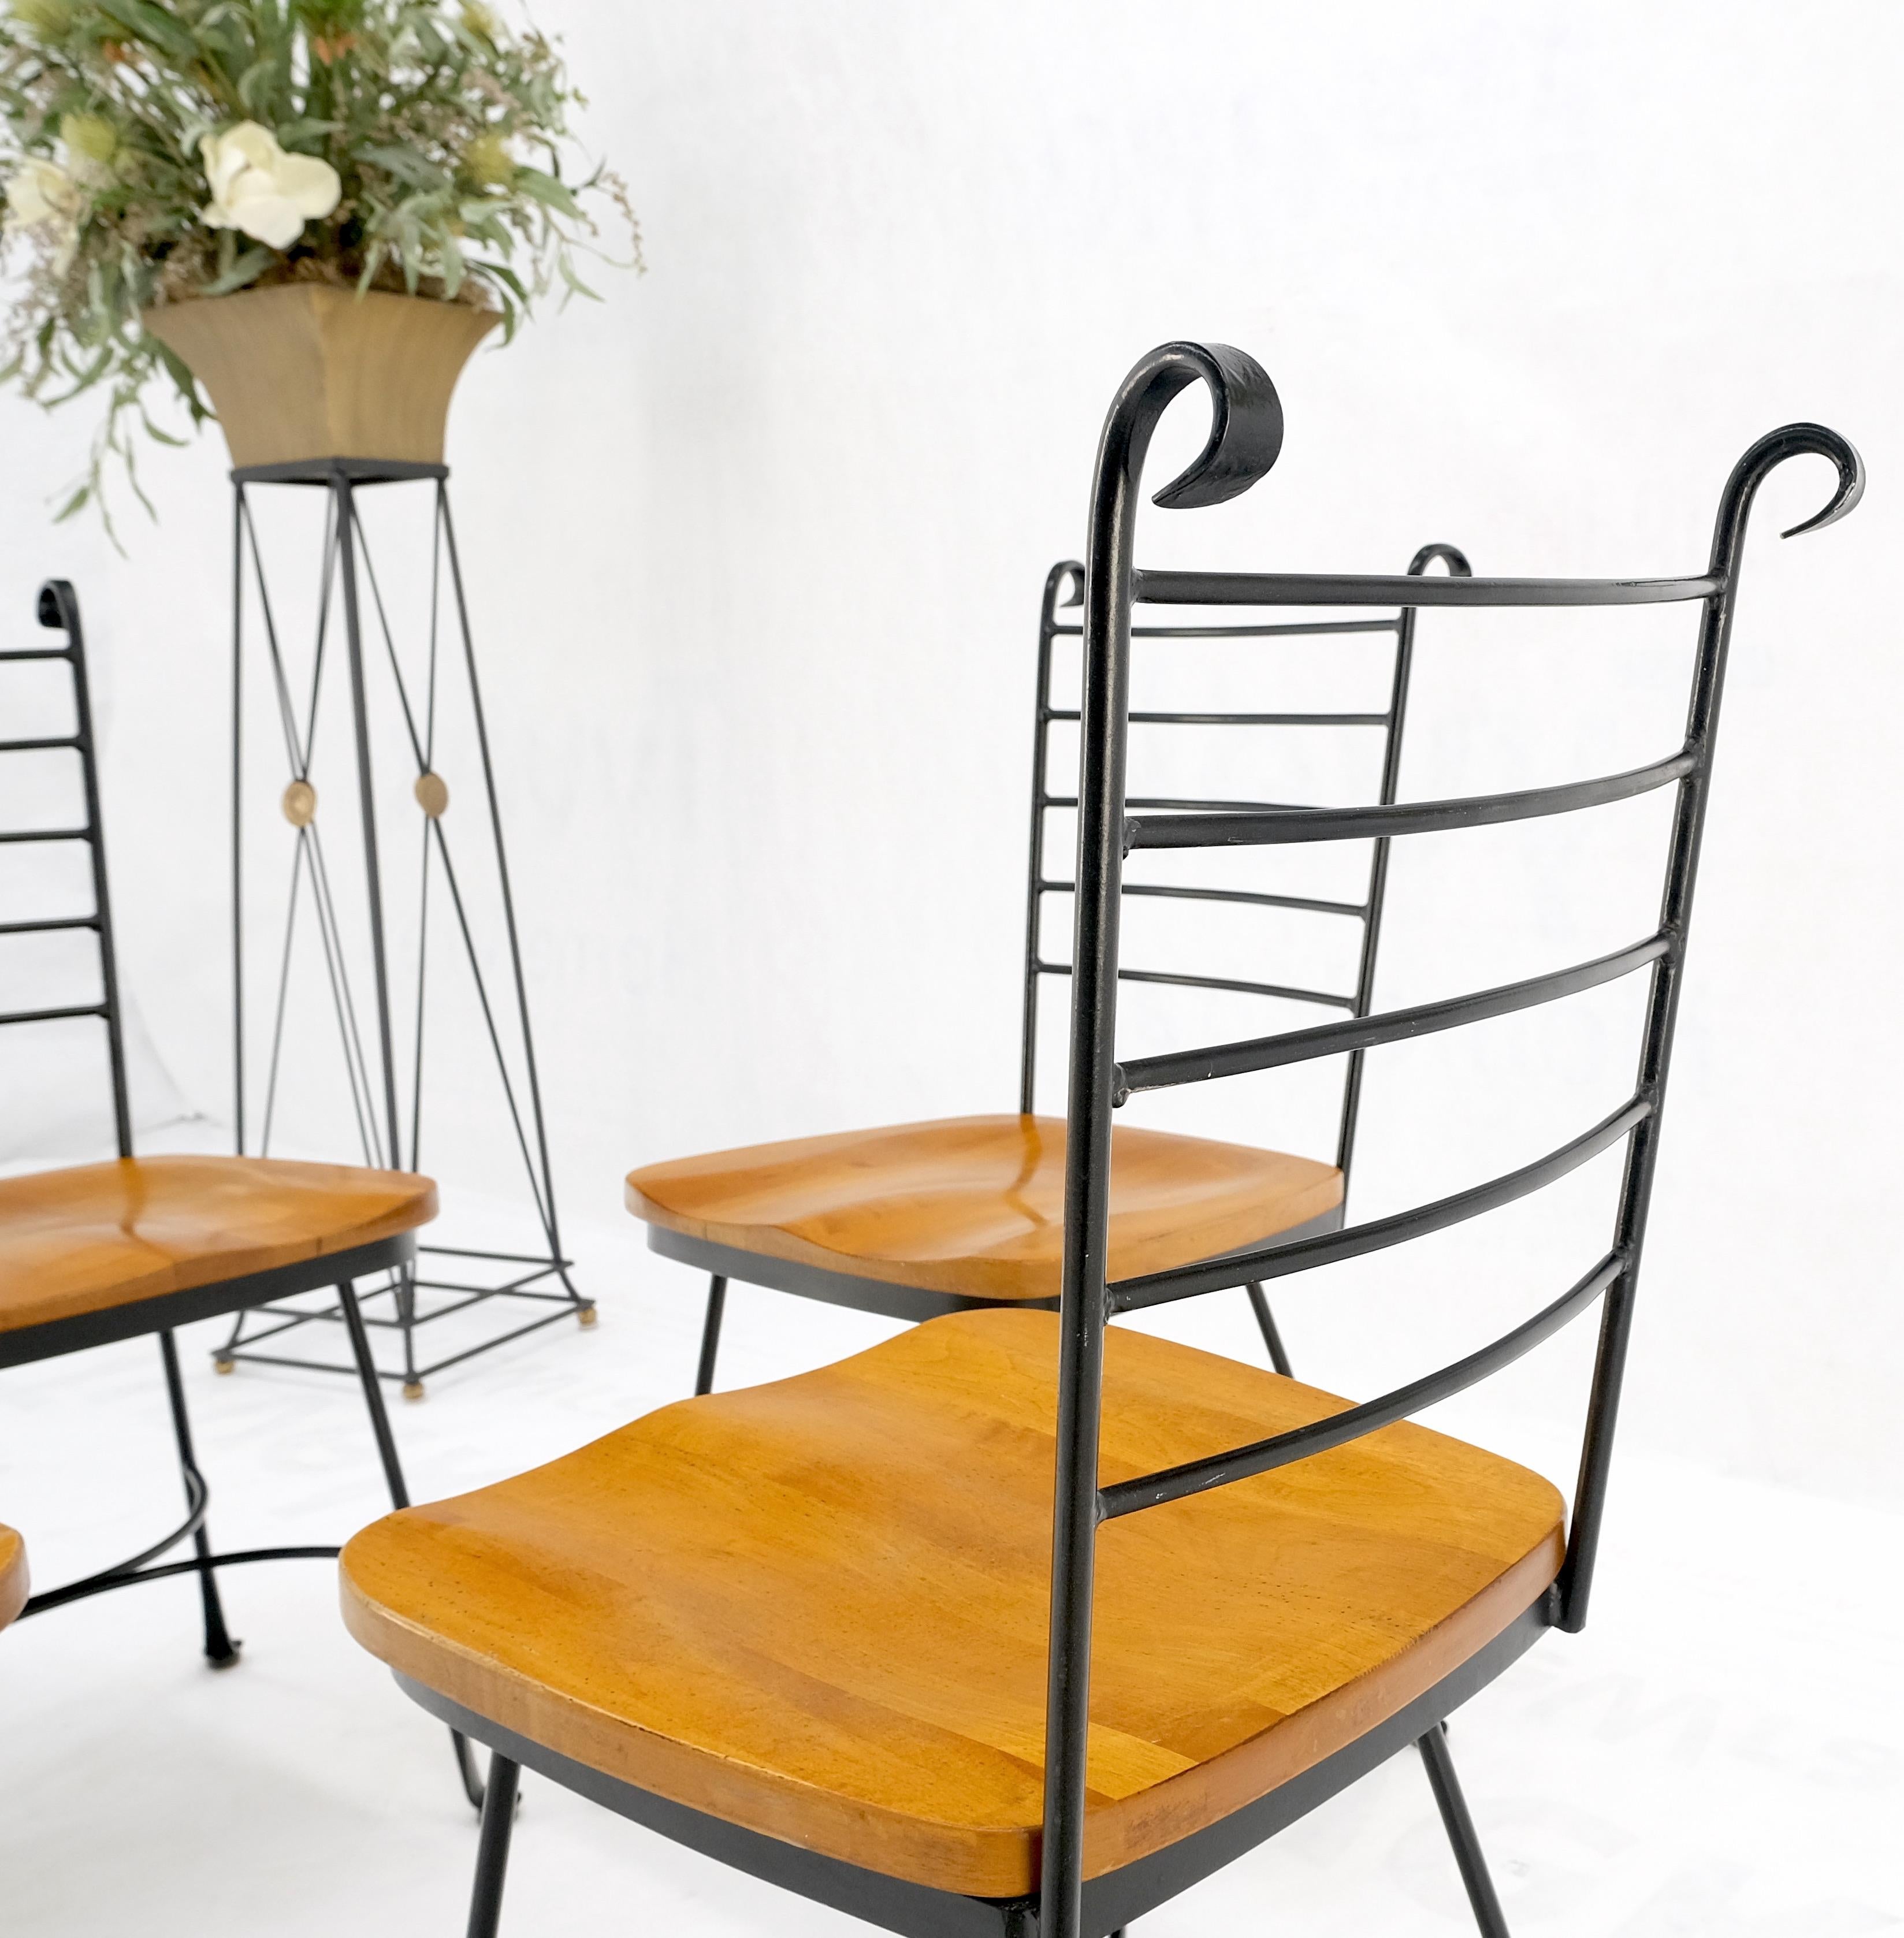 Lacquered American Mid-Century Modern Wrought Iron & Solid Birch Seats Dining Chairs Mint For Sale